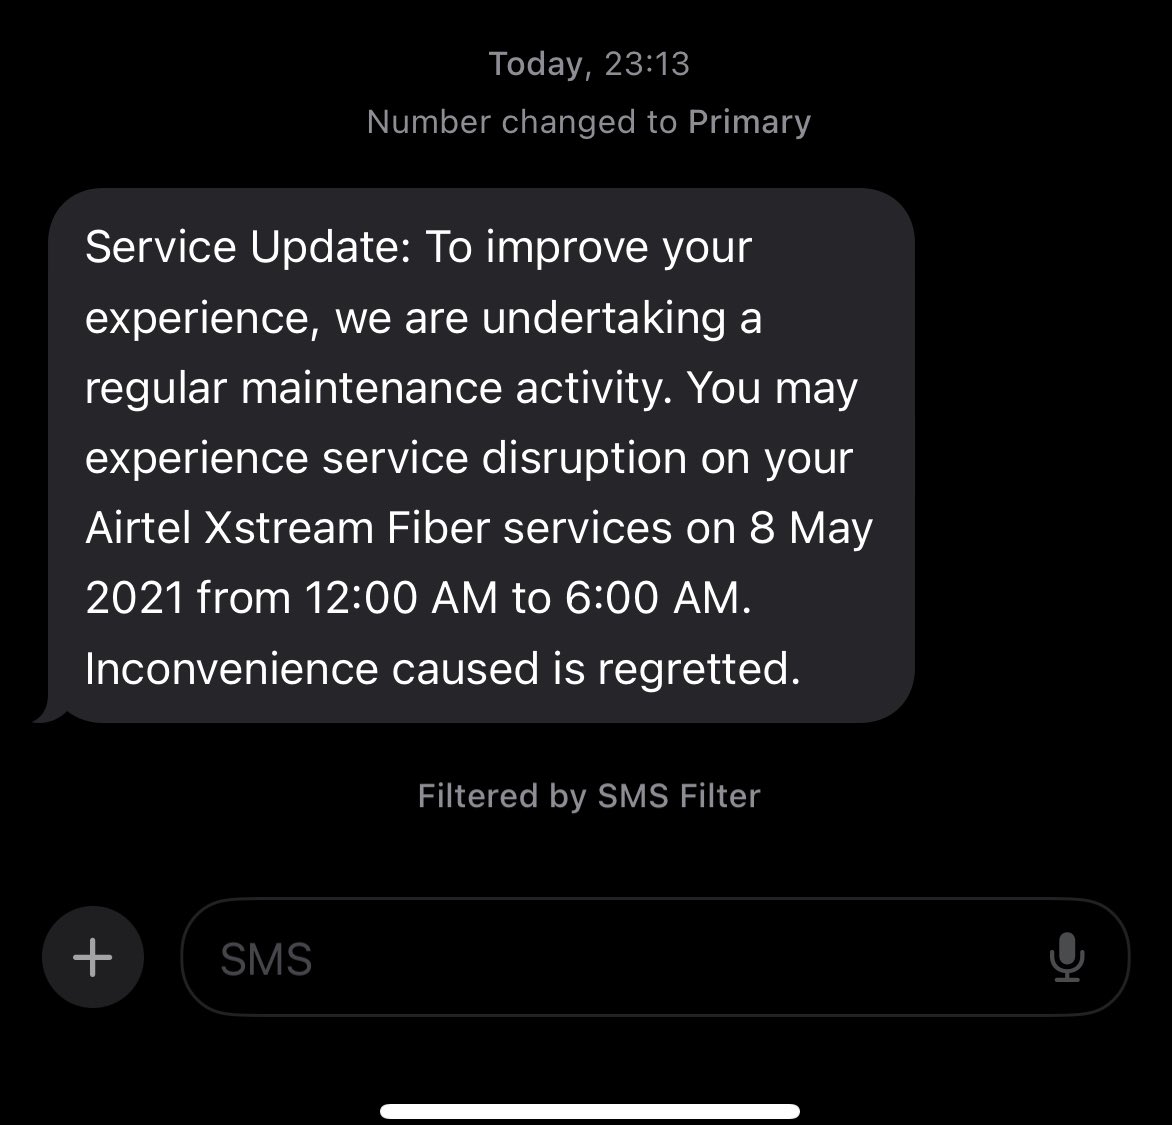 Look! @airtelindia has invented time travel! “8 May 2021”. I shall tell 2021 me to keep mobile data ready. Wow 🧟‍♀️